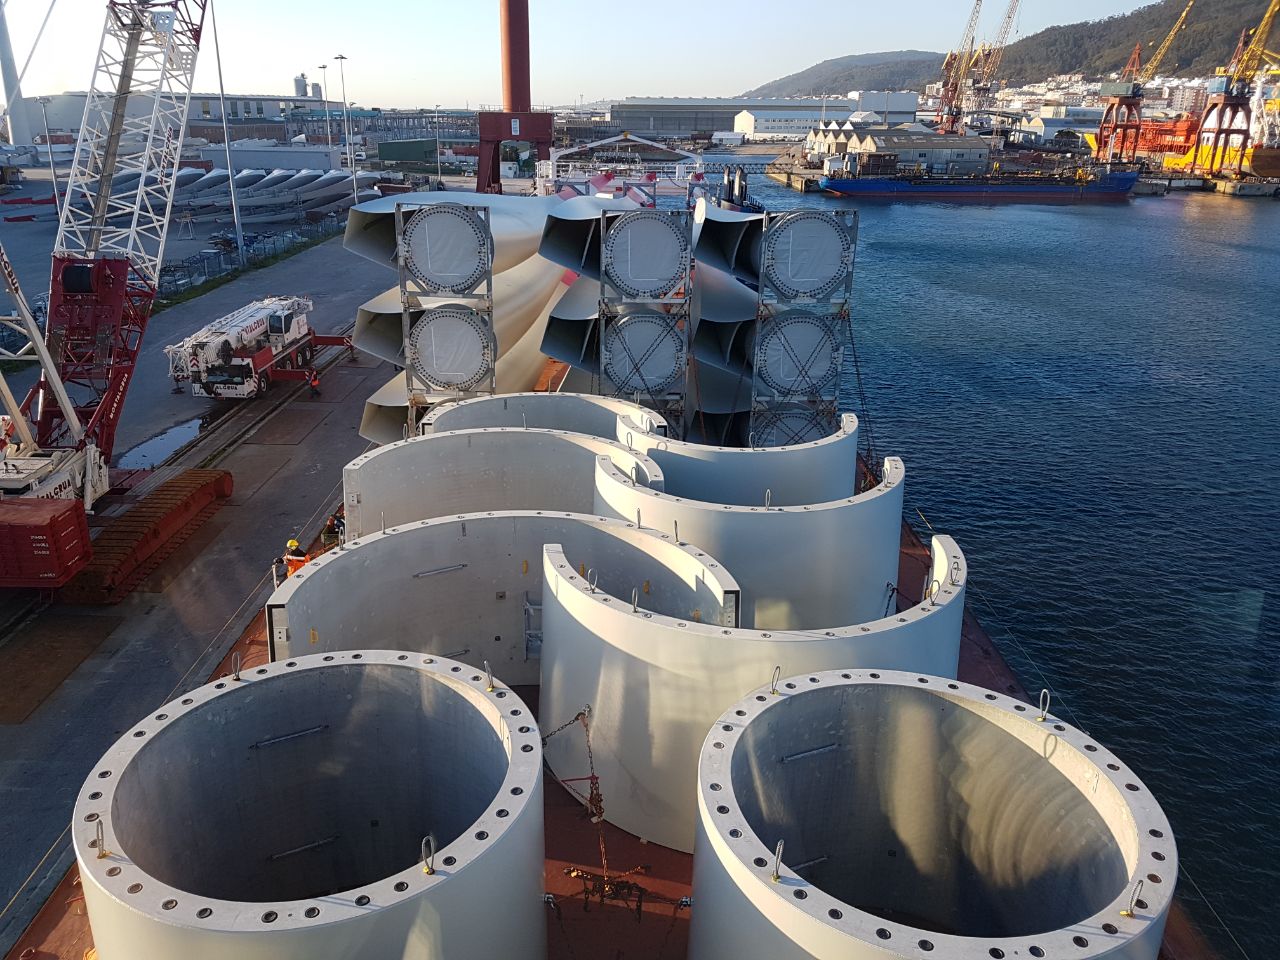 Tower sections and blades of wind turbines on a ship in port